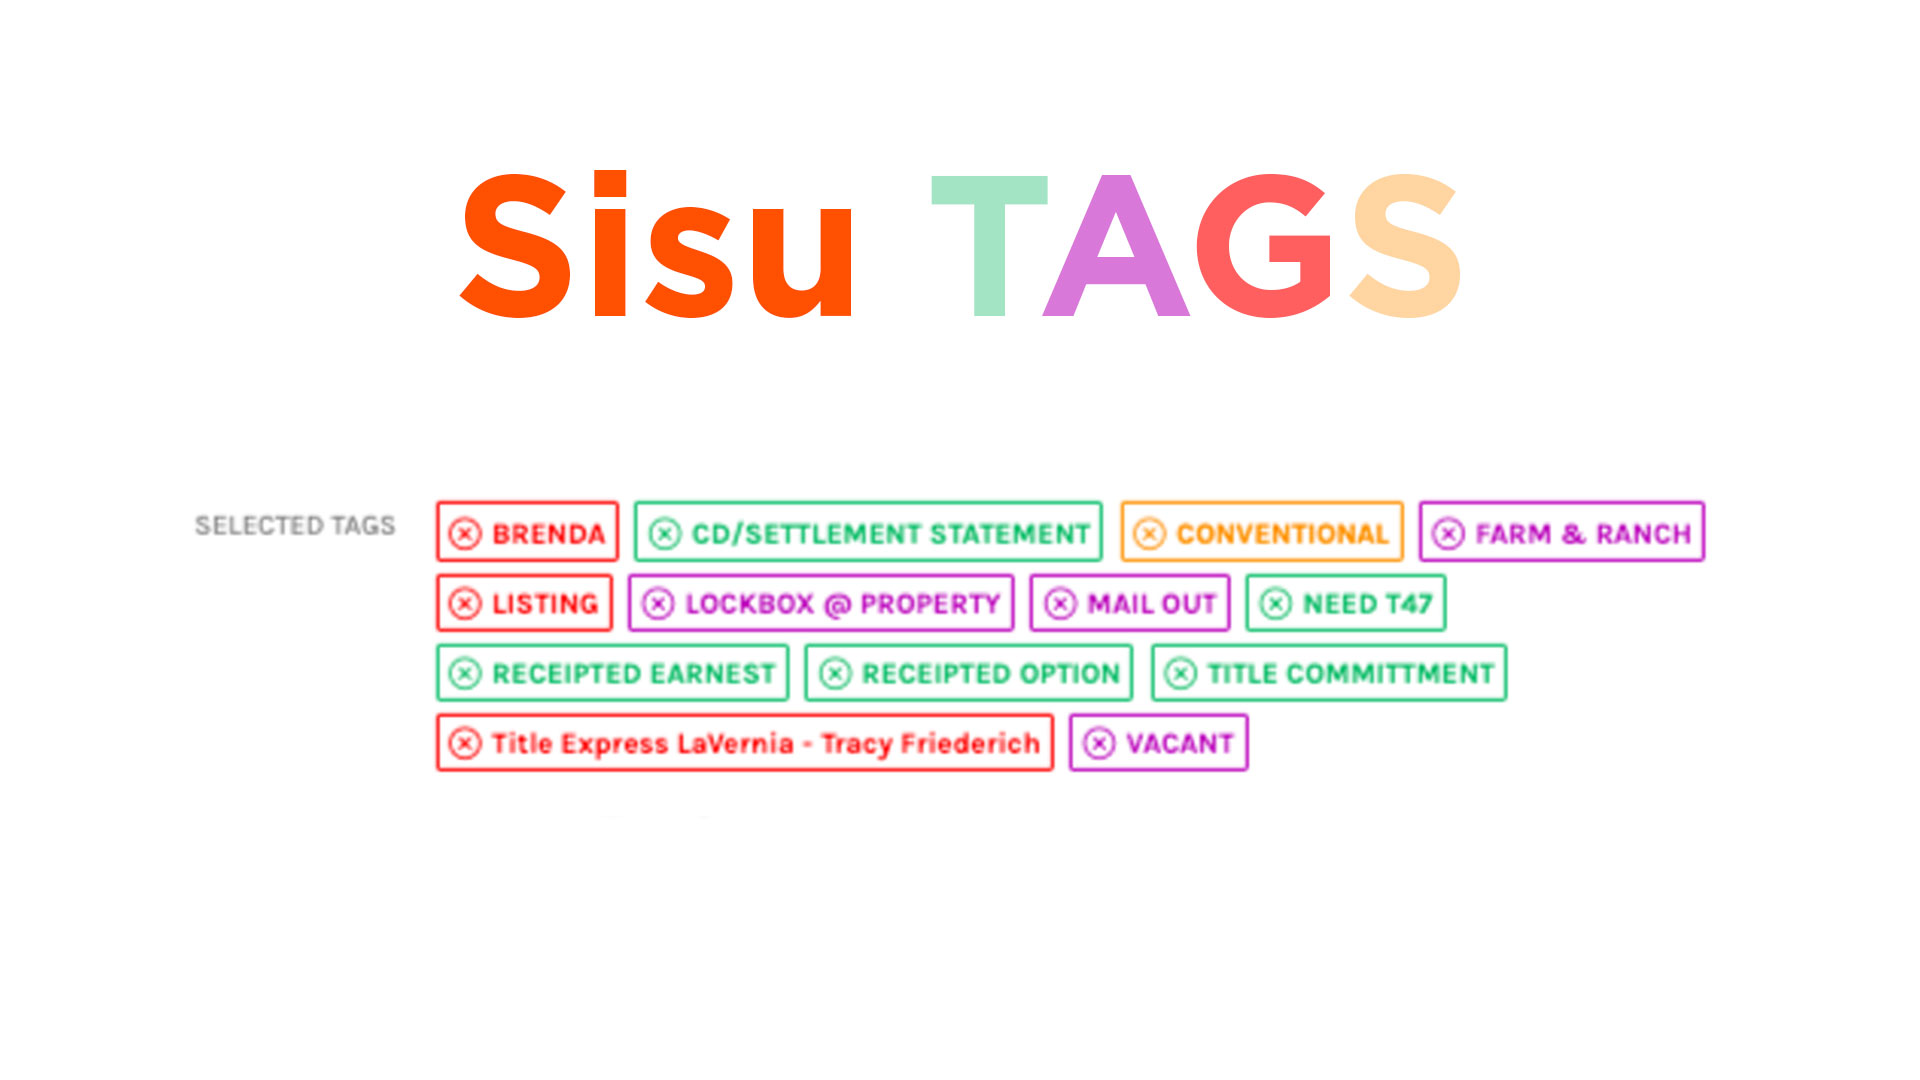 The most effective way to use tags in Sisu